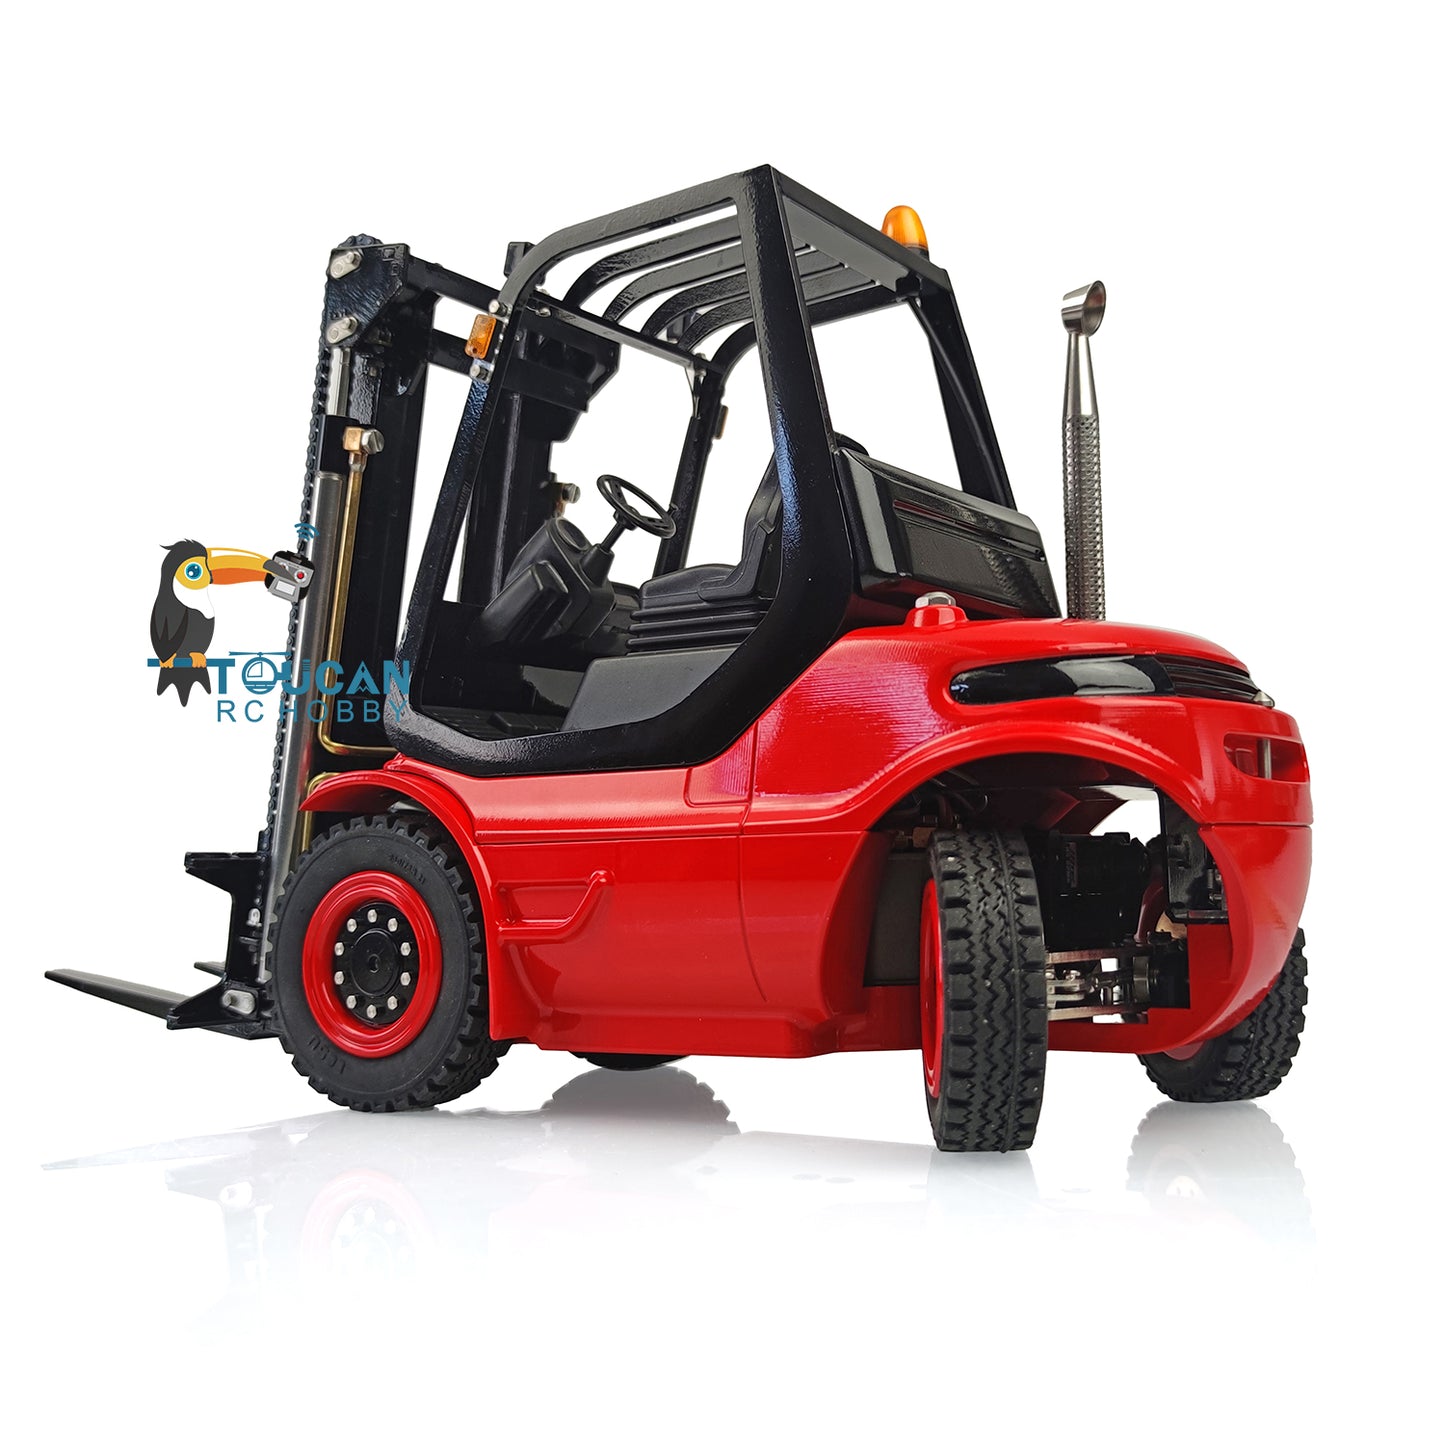 LESU Metal 1/14 Aoue Unassembled Hydraulic Forklift A0002 With RC System